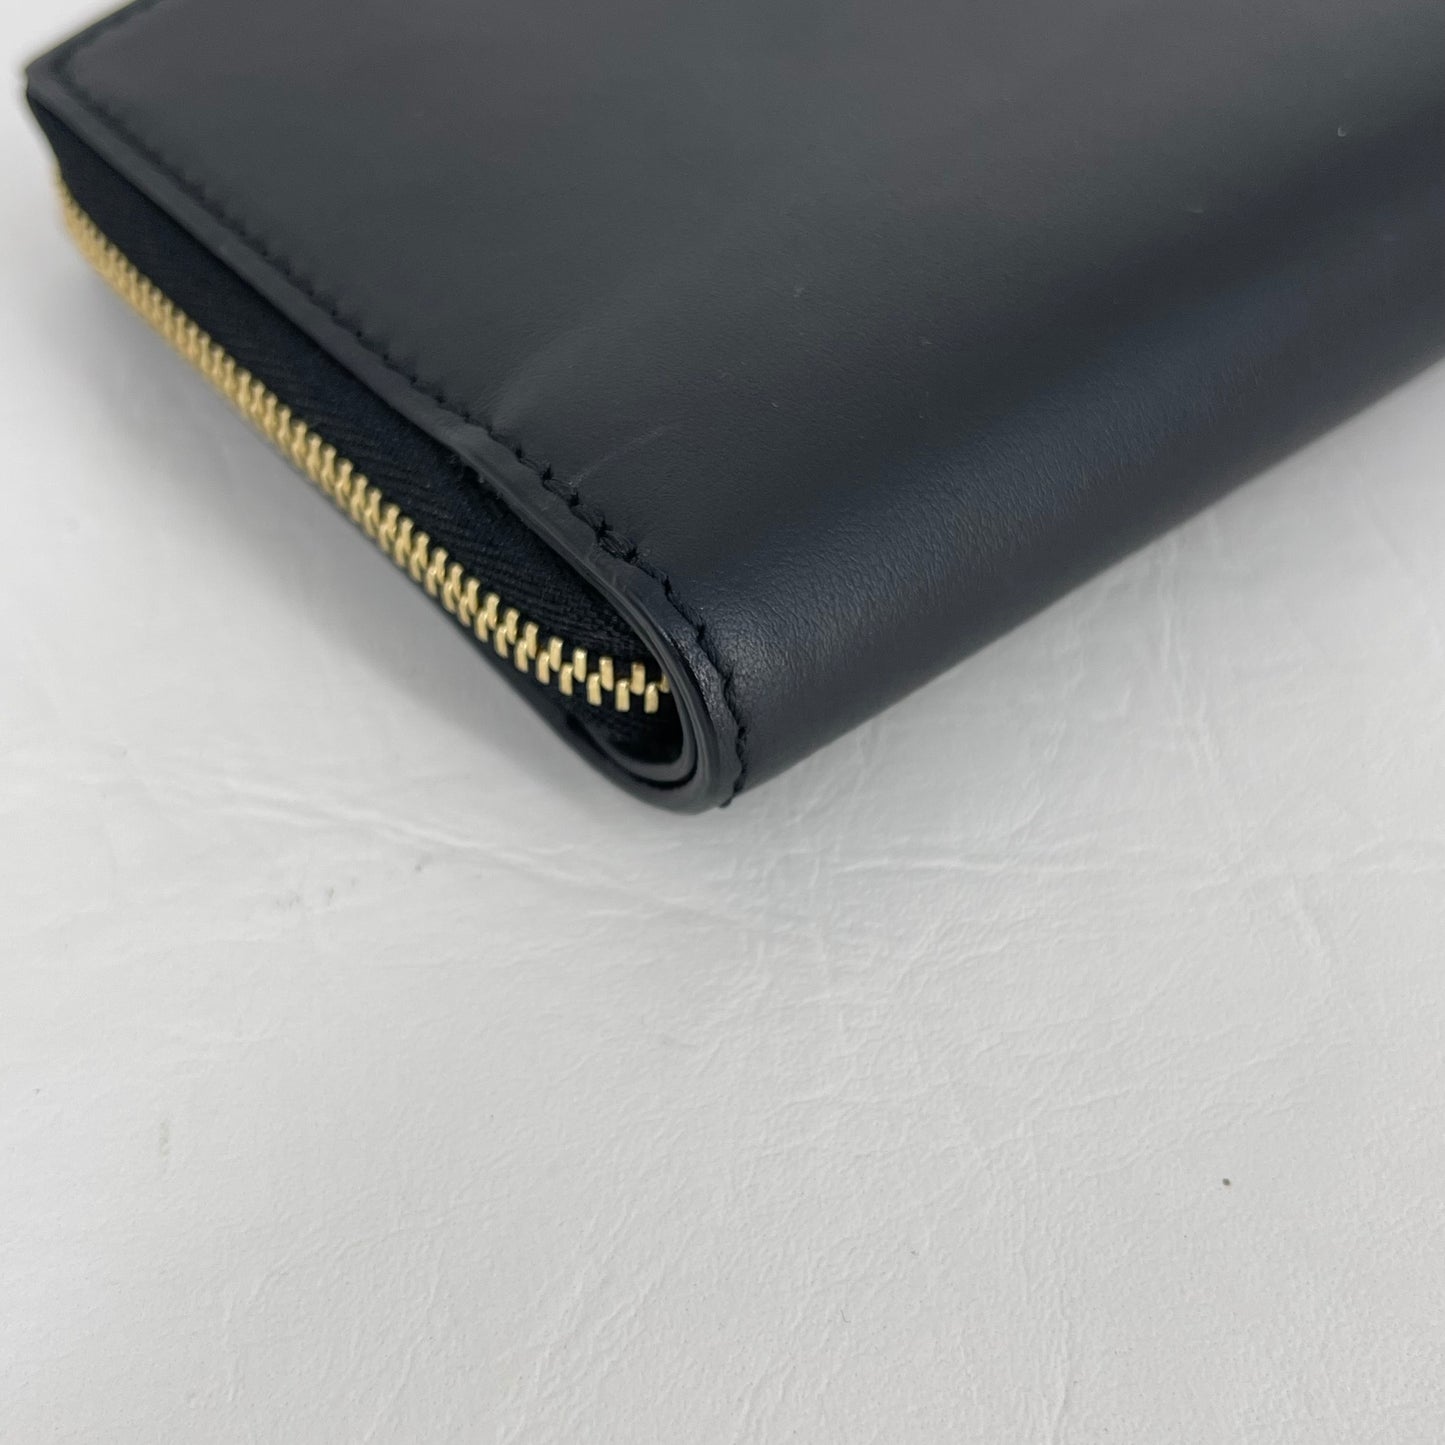 Authentic Burberry Black Leather Wallet